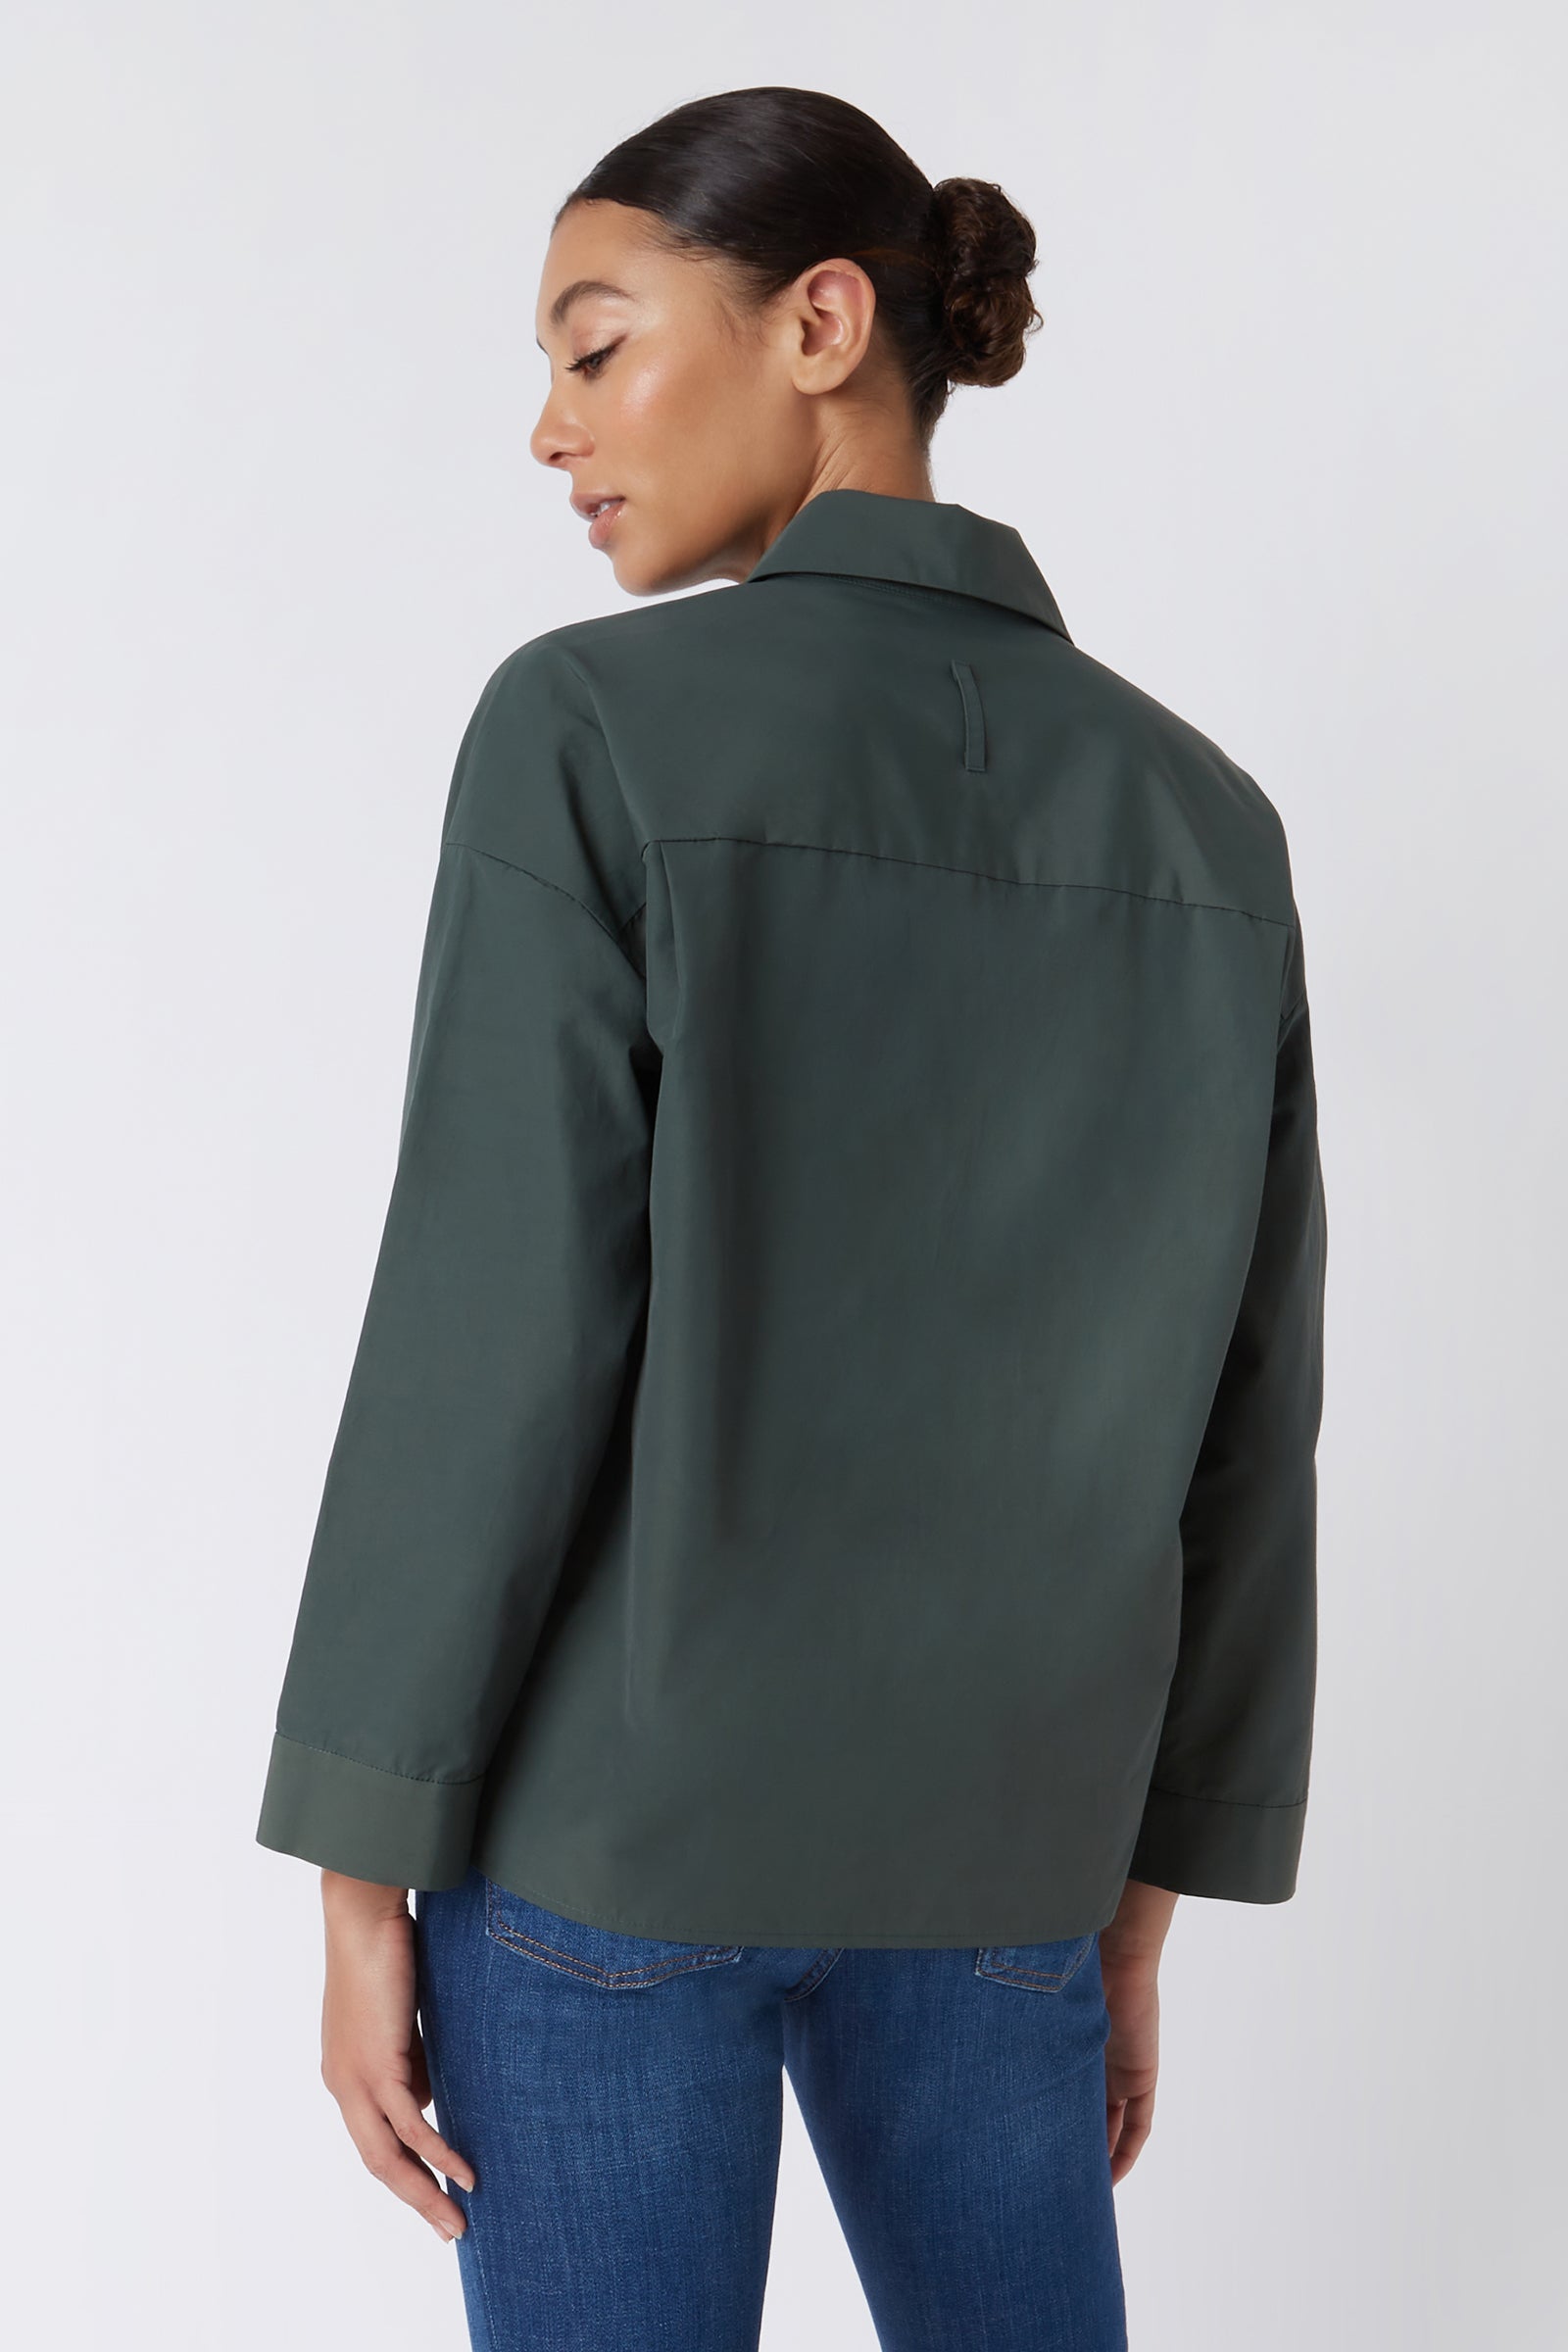 Kal Rieman Emma Collared Kimono in Loden Green on Model Cropped Back View